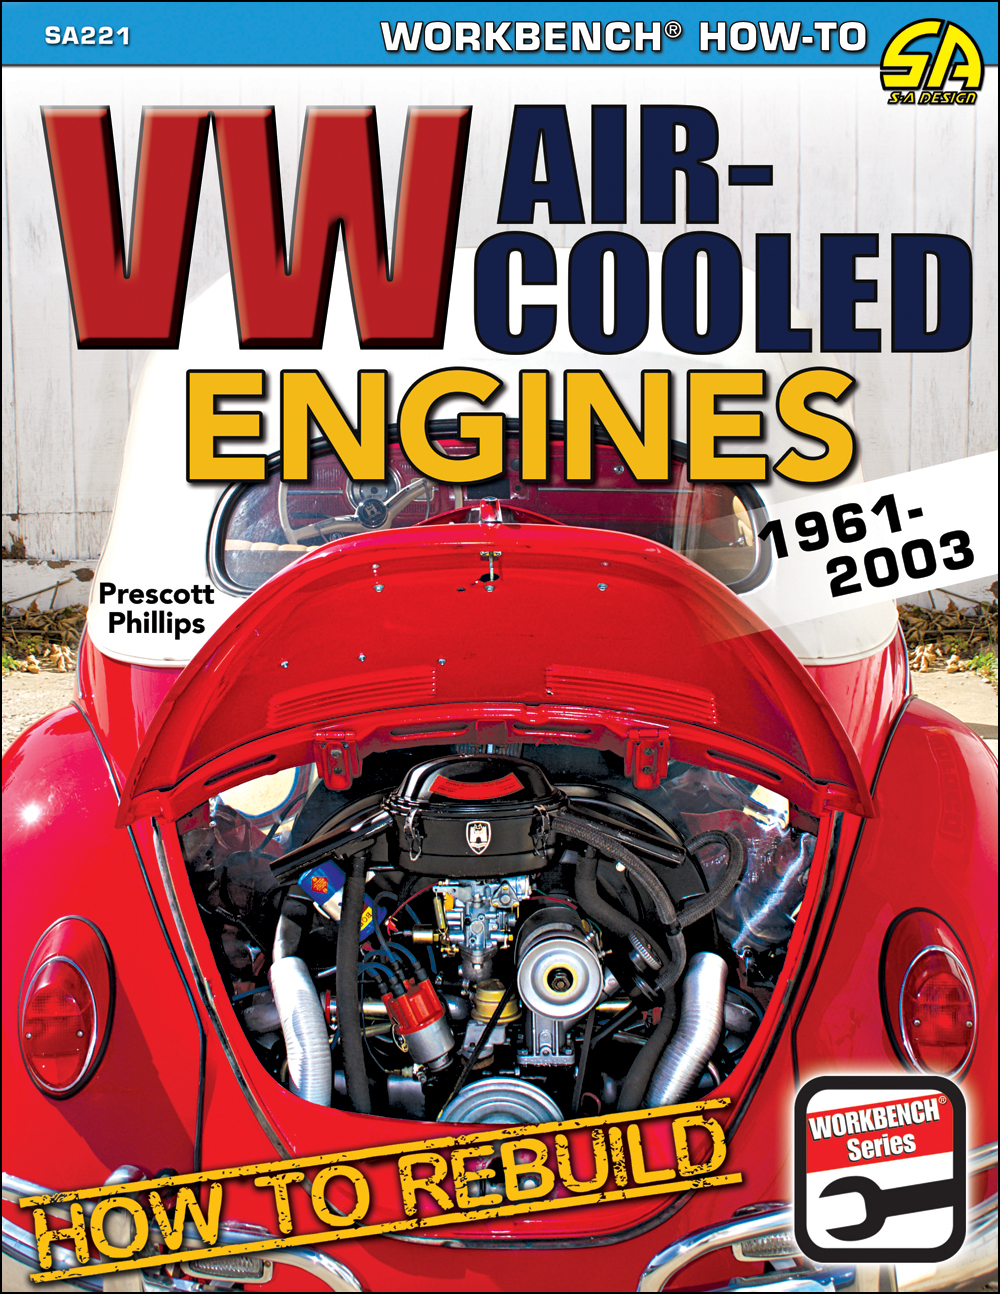 1961-2003 How to Rebuild VW Air-Cooled Engines Type 1, 2, and 3 Volkswagen